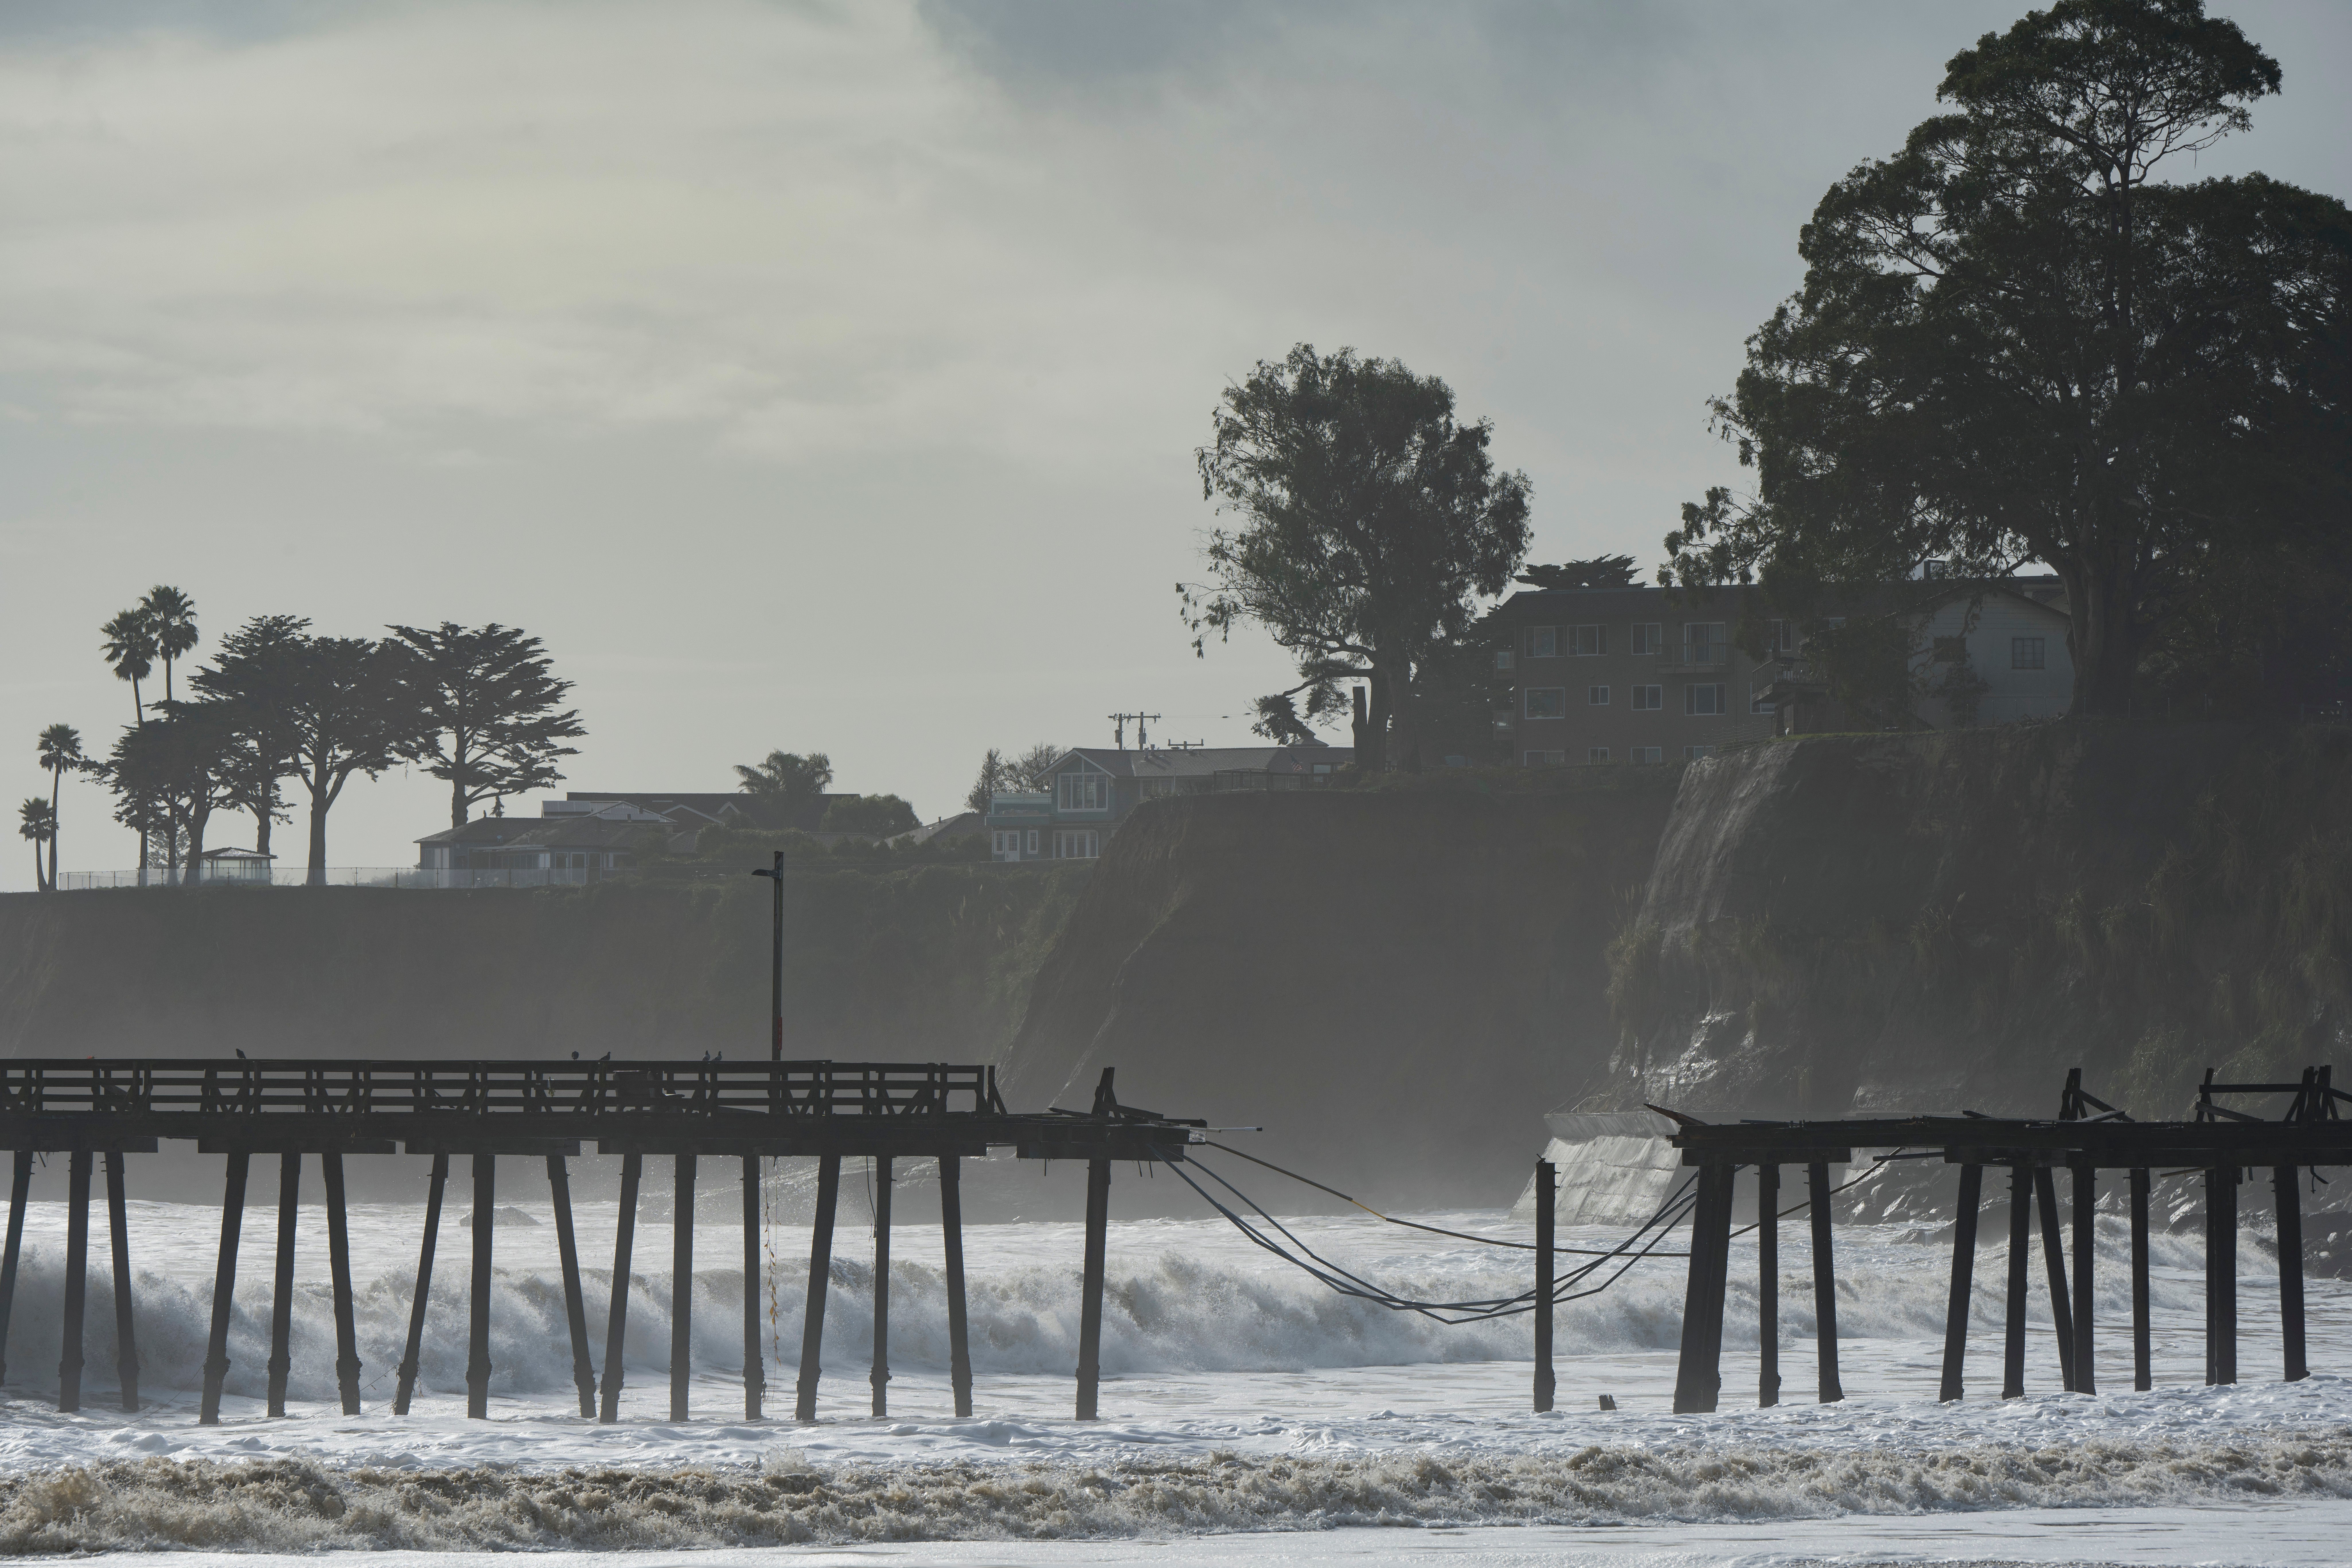 Storm surges damaged the pier in Capitola, California